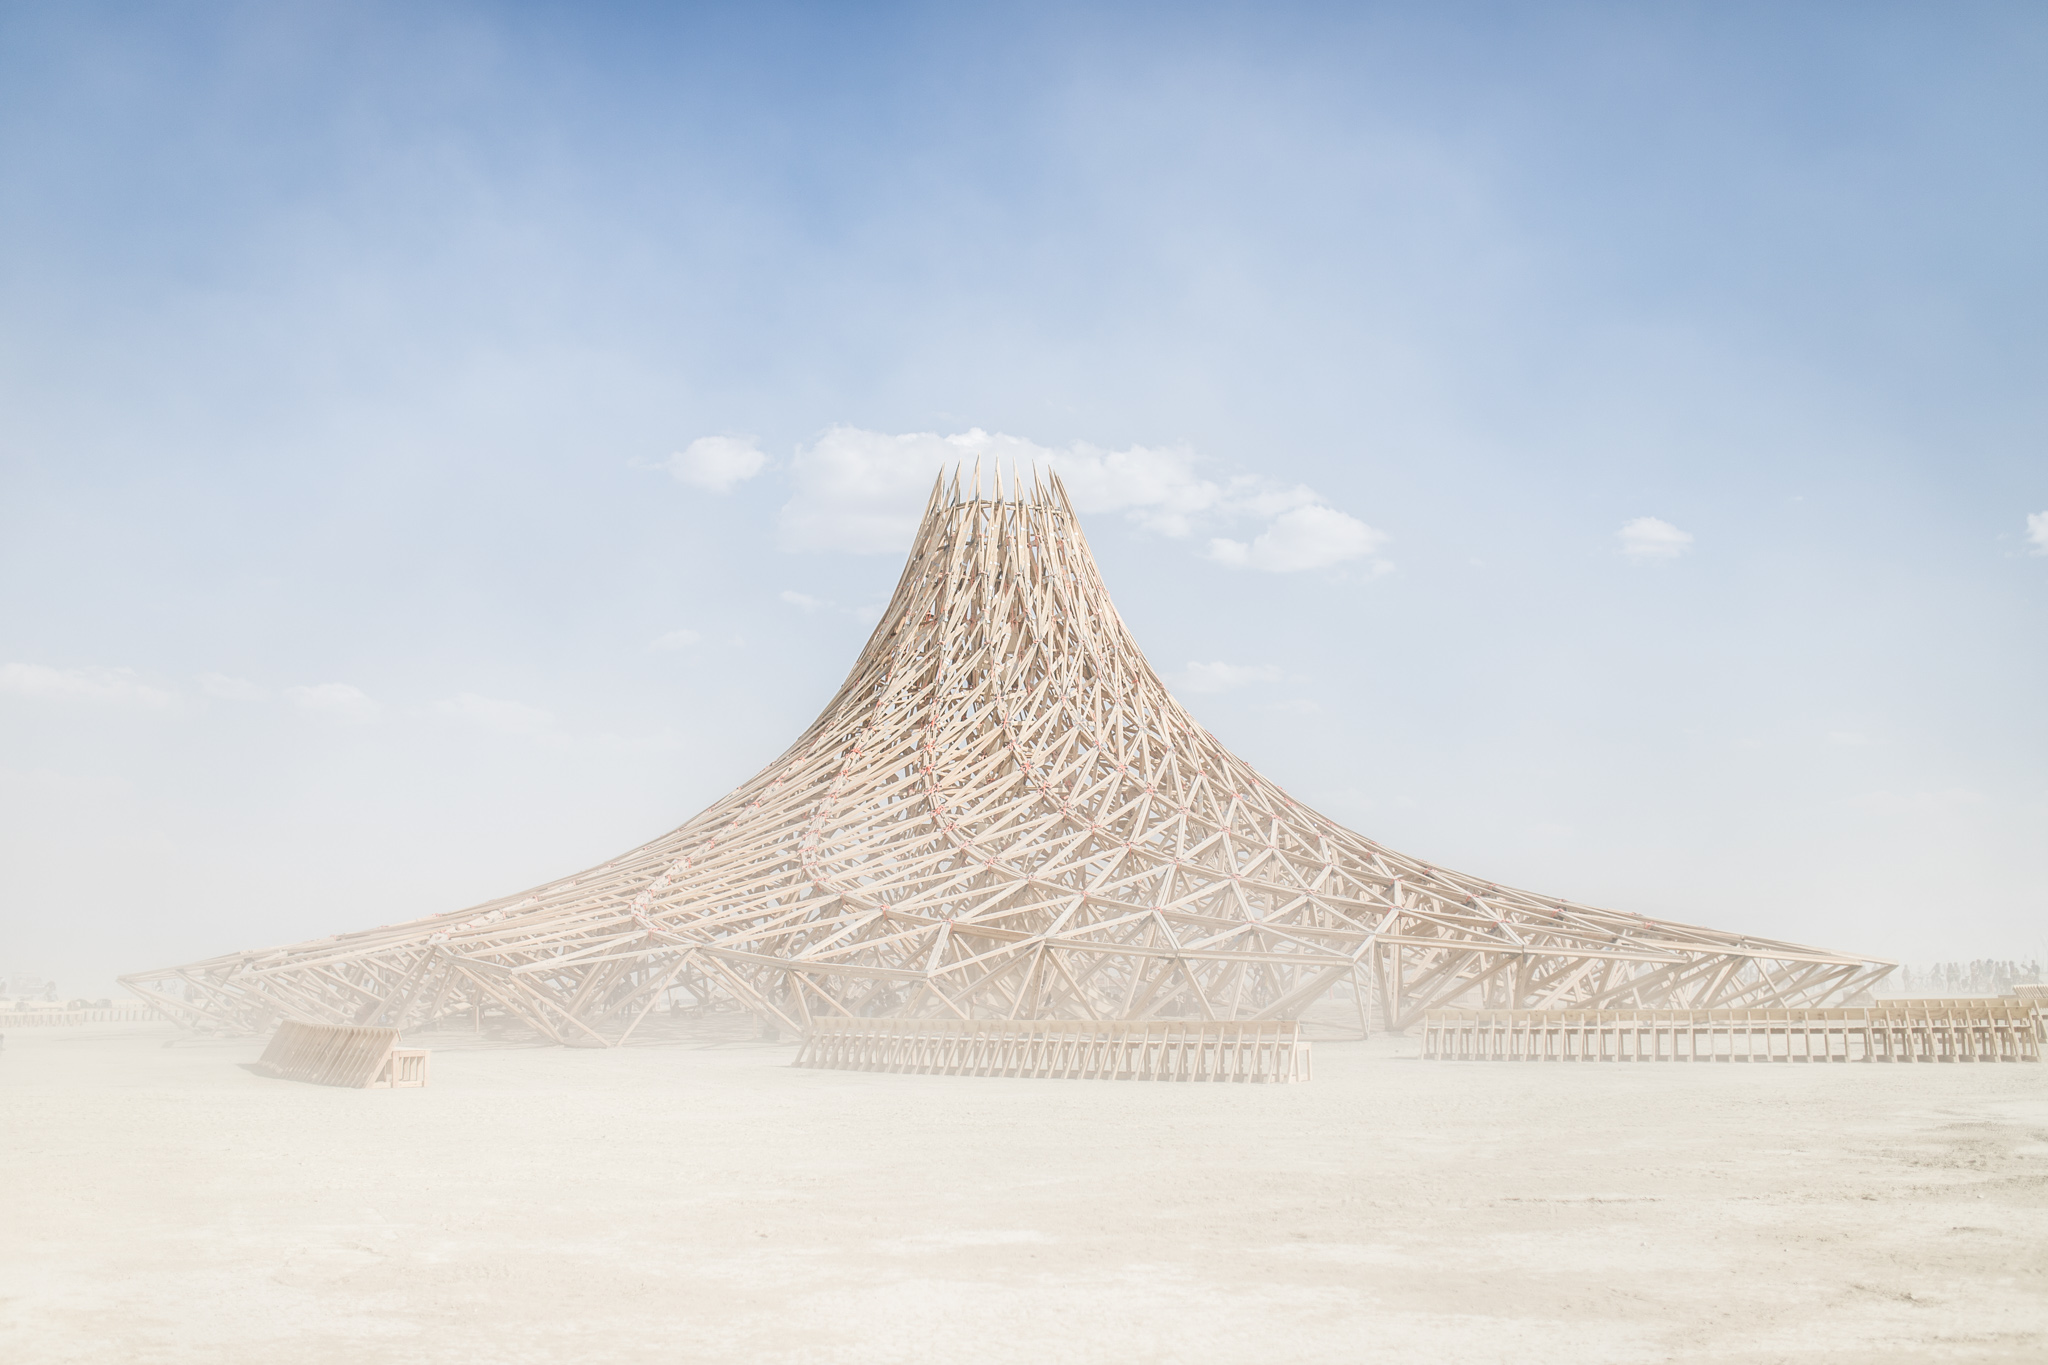 The Temple Where Burning Man's soul goes up in flames